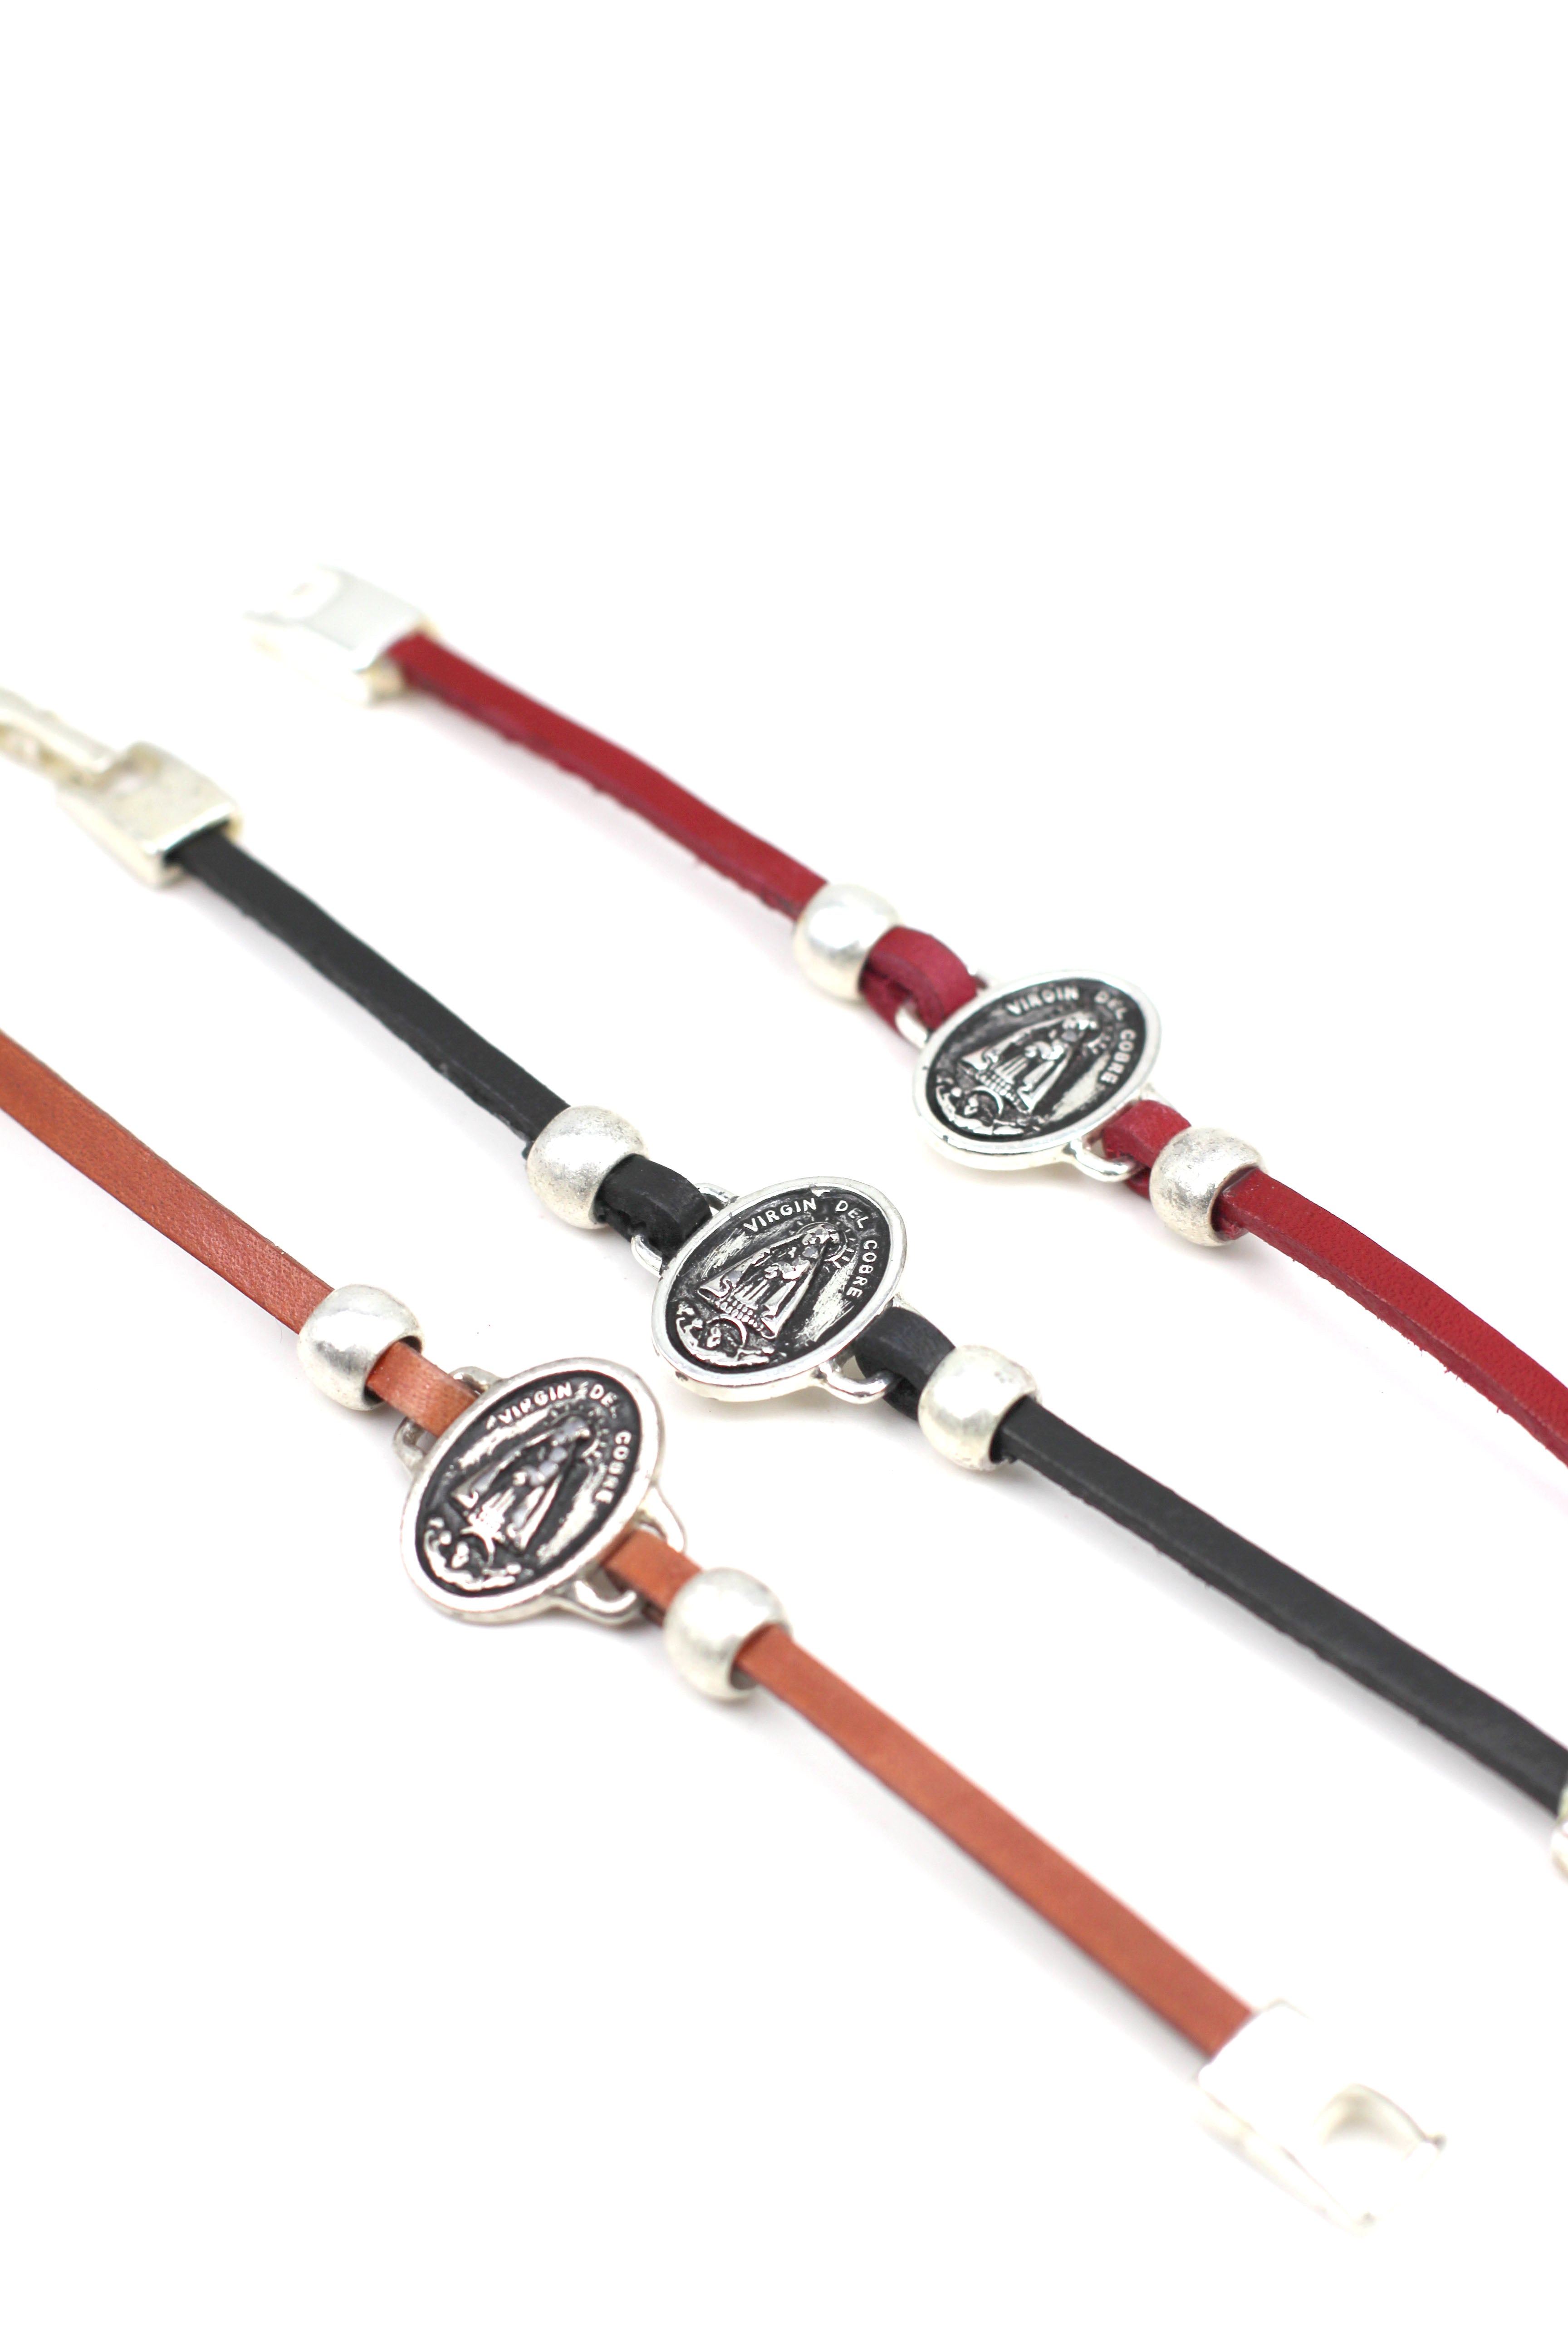 Bracelet of La Caridad del Cobre / Our Lady of Charity handmade jewelry with a Single Leather Strap by Graciela's Collection